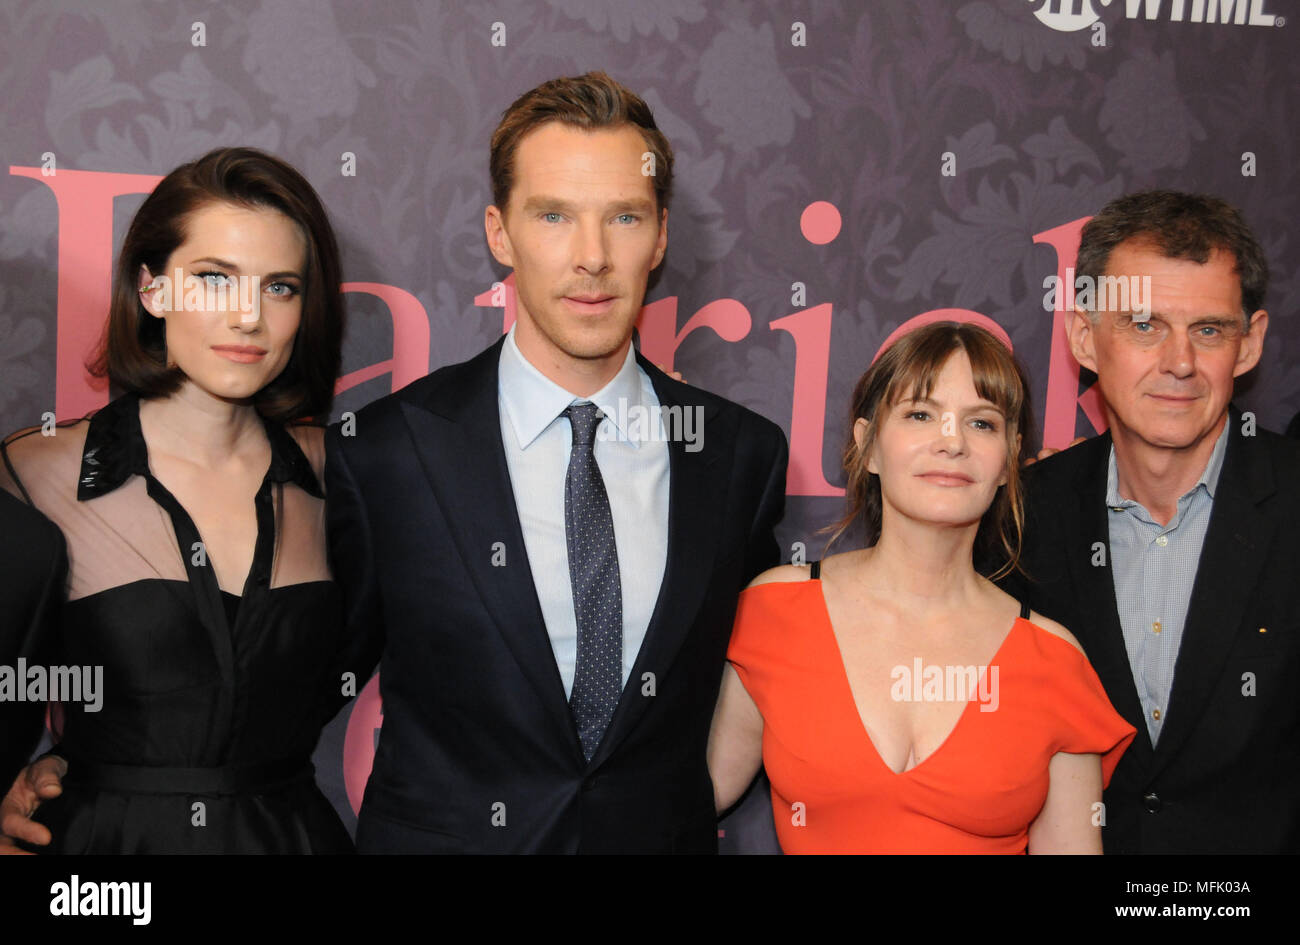 LOS ANGELES, CA - APRIL 25:  (L-R) Actress Allison Williams, actor Benedict Cumberbatch, actress Jennifer Jason Leigh and executive producer Michael Jackson attend the Premiere of Showtime's 'Patrick Melrose' at the Linwood Dunn Theater on April 25, 2018 in Los Angeles, California. Photo by Barry King/Alamy Live News Stock Photo